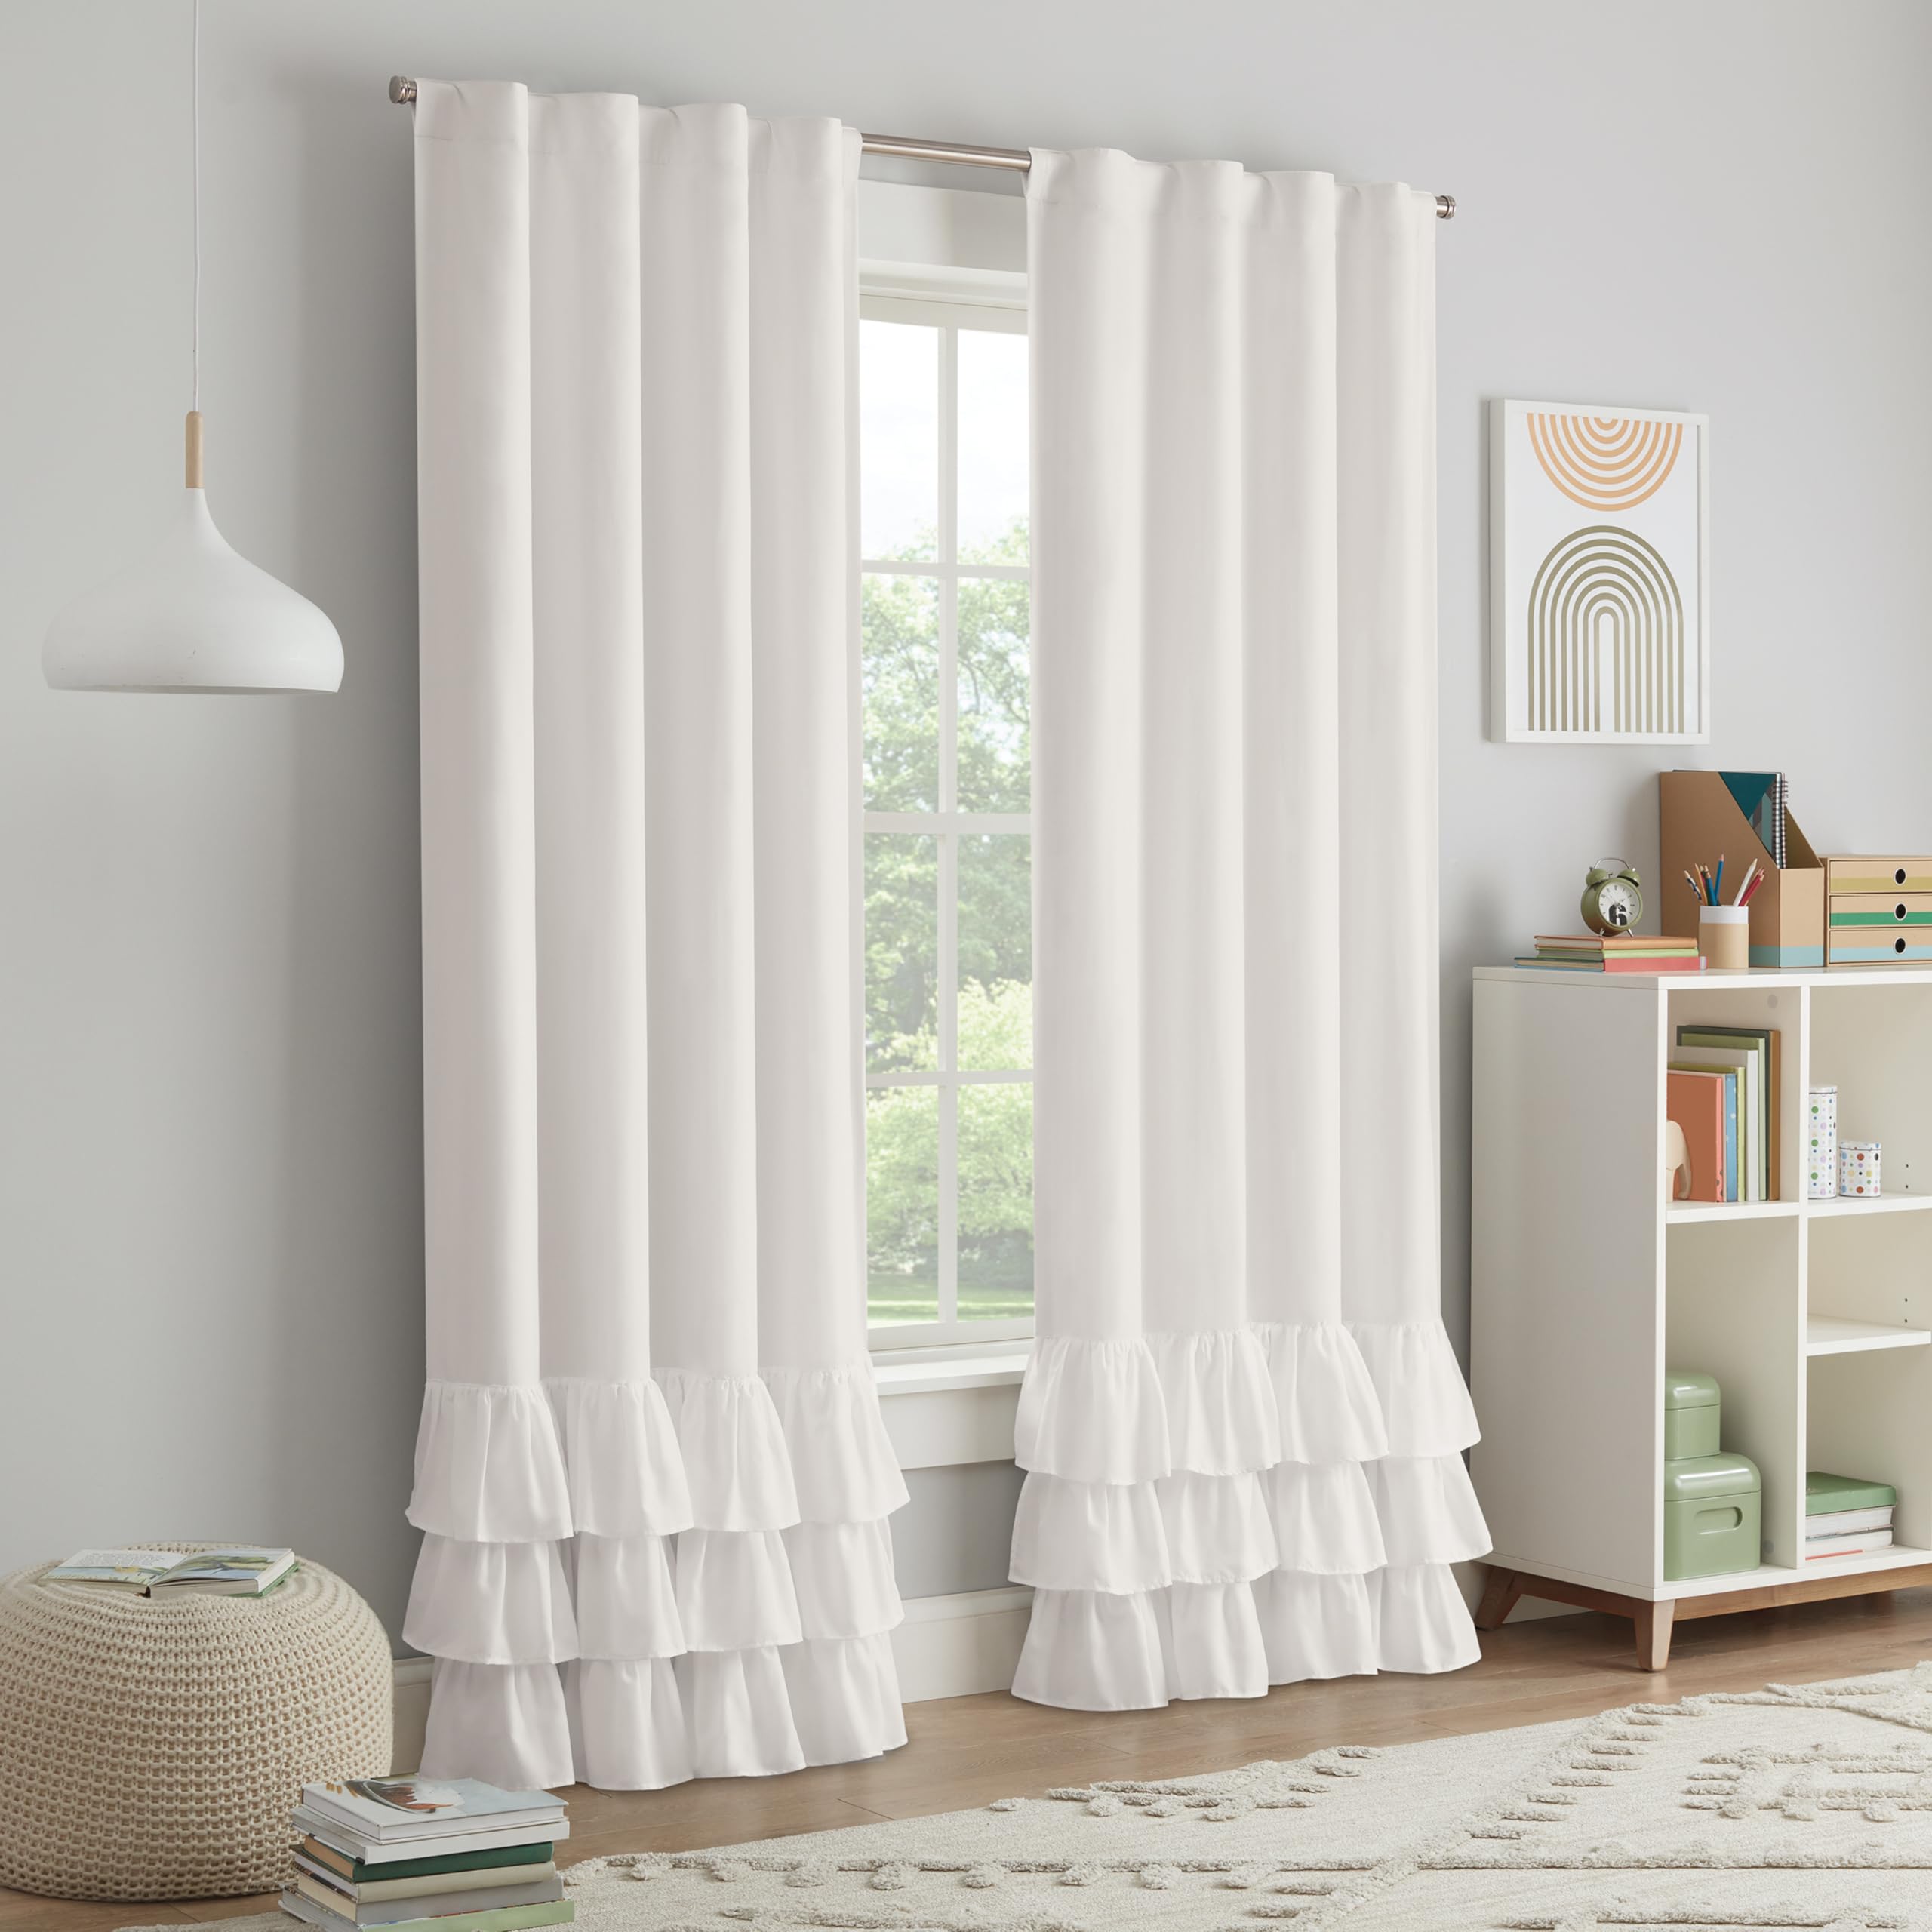 Eclipse Blackout Curtains, Tiered Ruffle Kids Curtains, 84 in x 40 in, Thermaback 100% Blackout Curtains with Rod Pocket Header, Curtains for Kids Room or Playroom, 1 Window Curtain, White